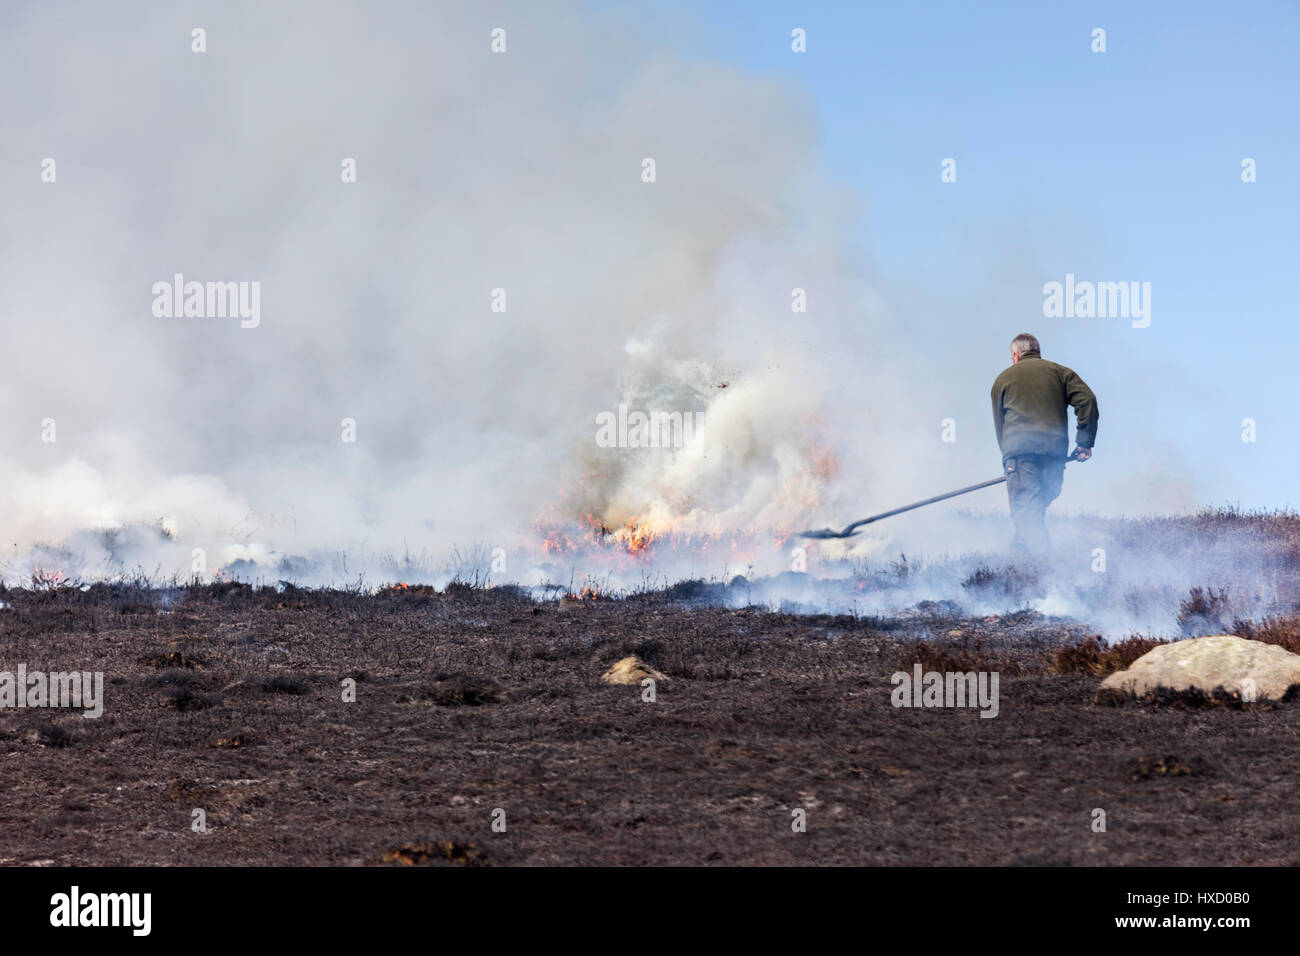 County Durham UK. Monday 27th March. UK Weather. Controlled heather burning of the grouse moors continues during the warm spring weather in the North Pennines. The heather is burned in a rotation in order to provide fresh young heather shoots for the Red Grouse to feed on. Credit: David Forster/Alamy Live News Stock Photo